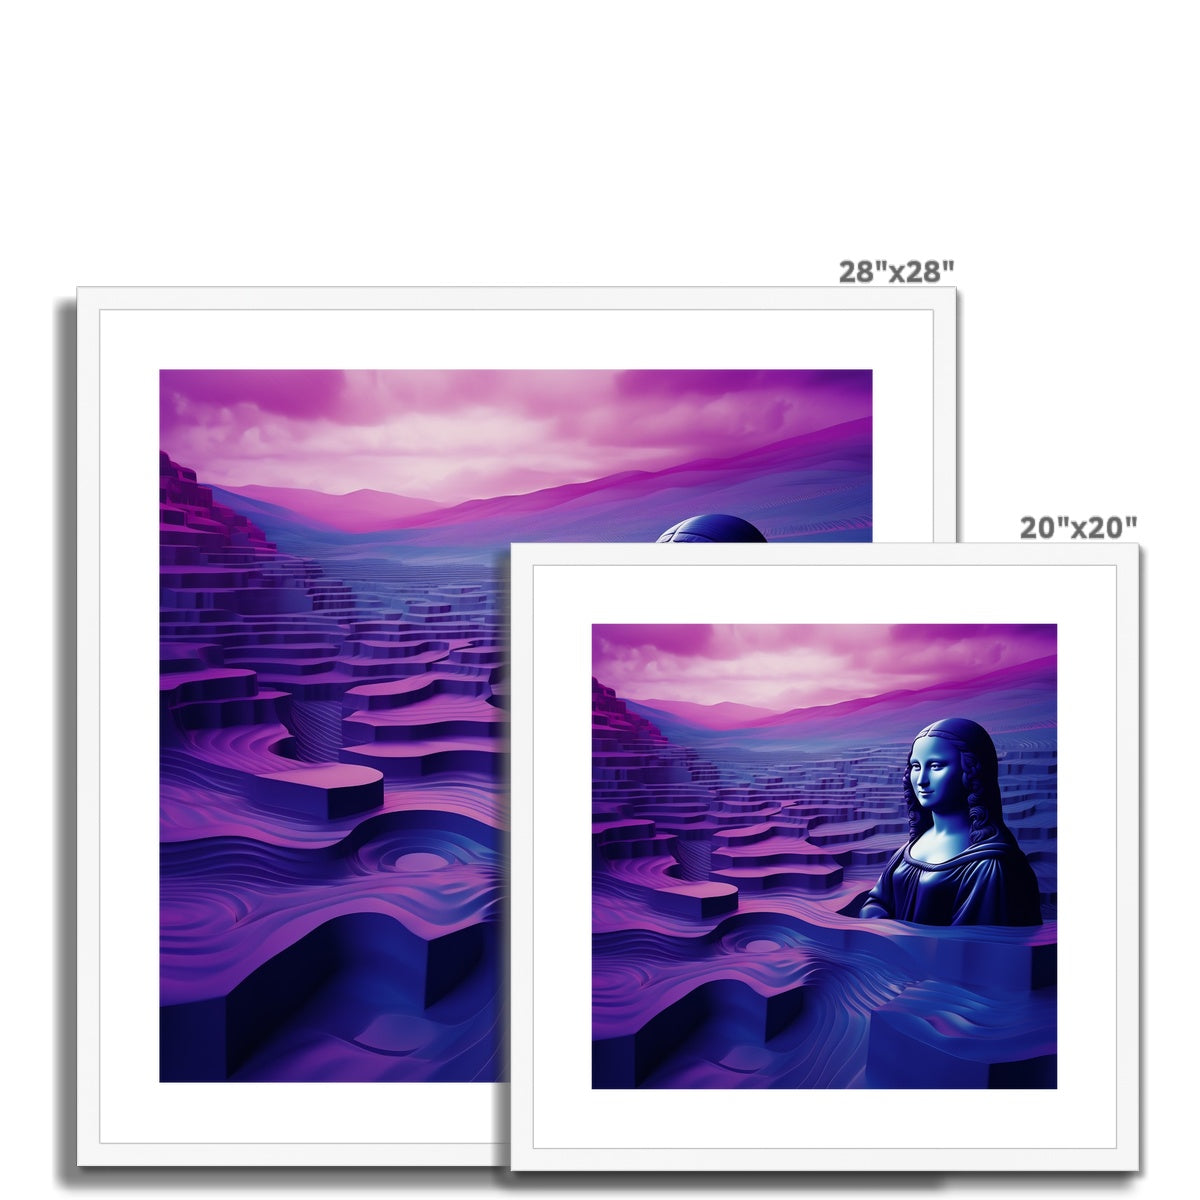 Purple Hills: The Mona Lisa Limited Edition Framed & Mounted Print